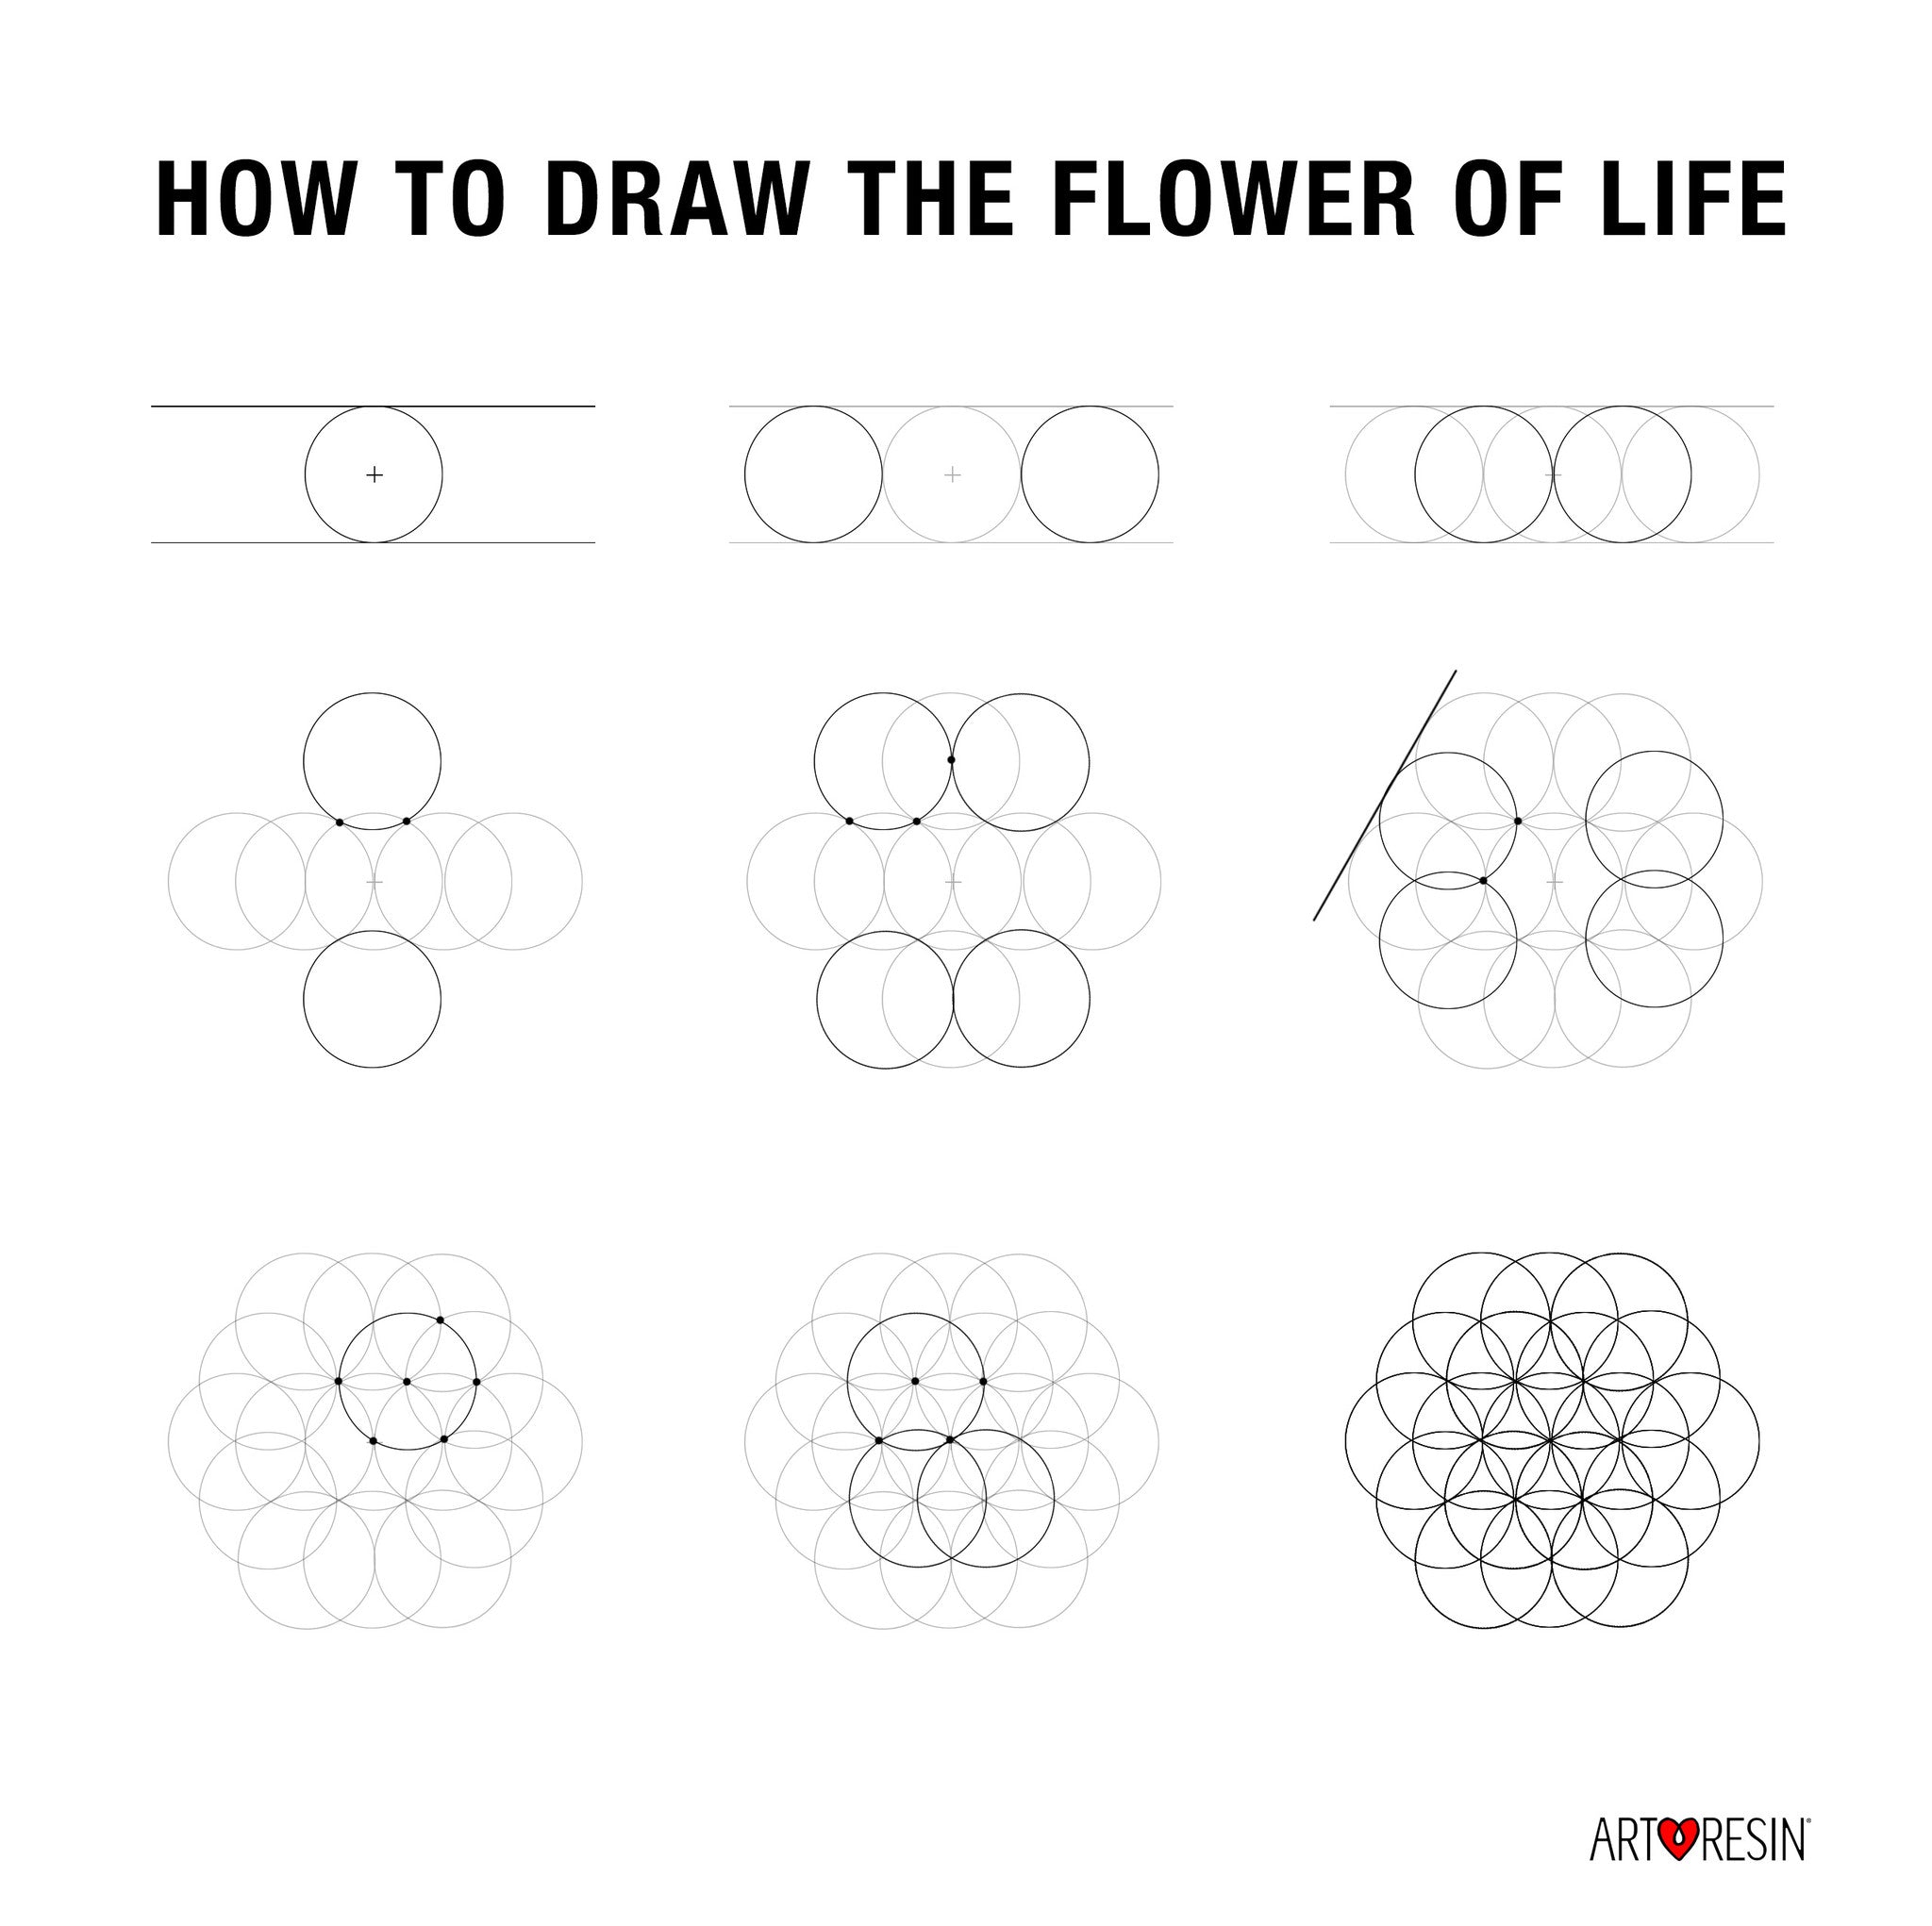 How Can I Draw The Flower Of Life